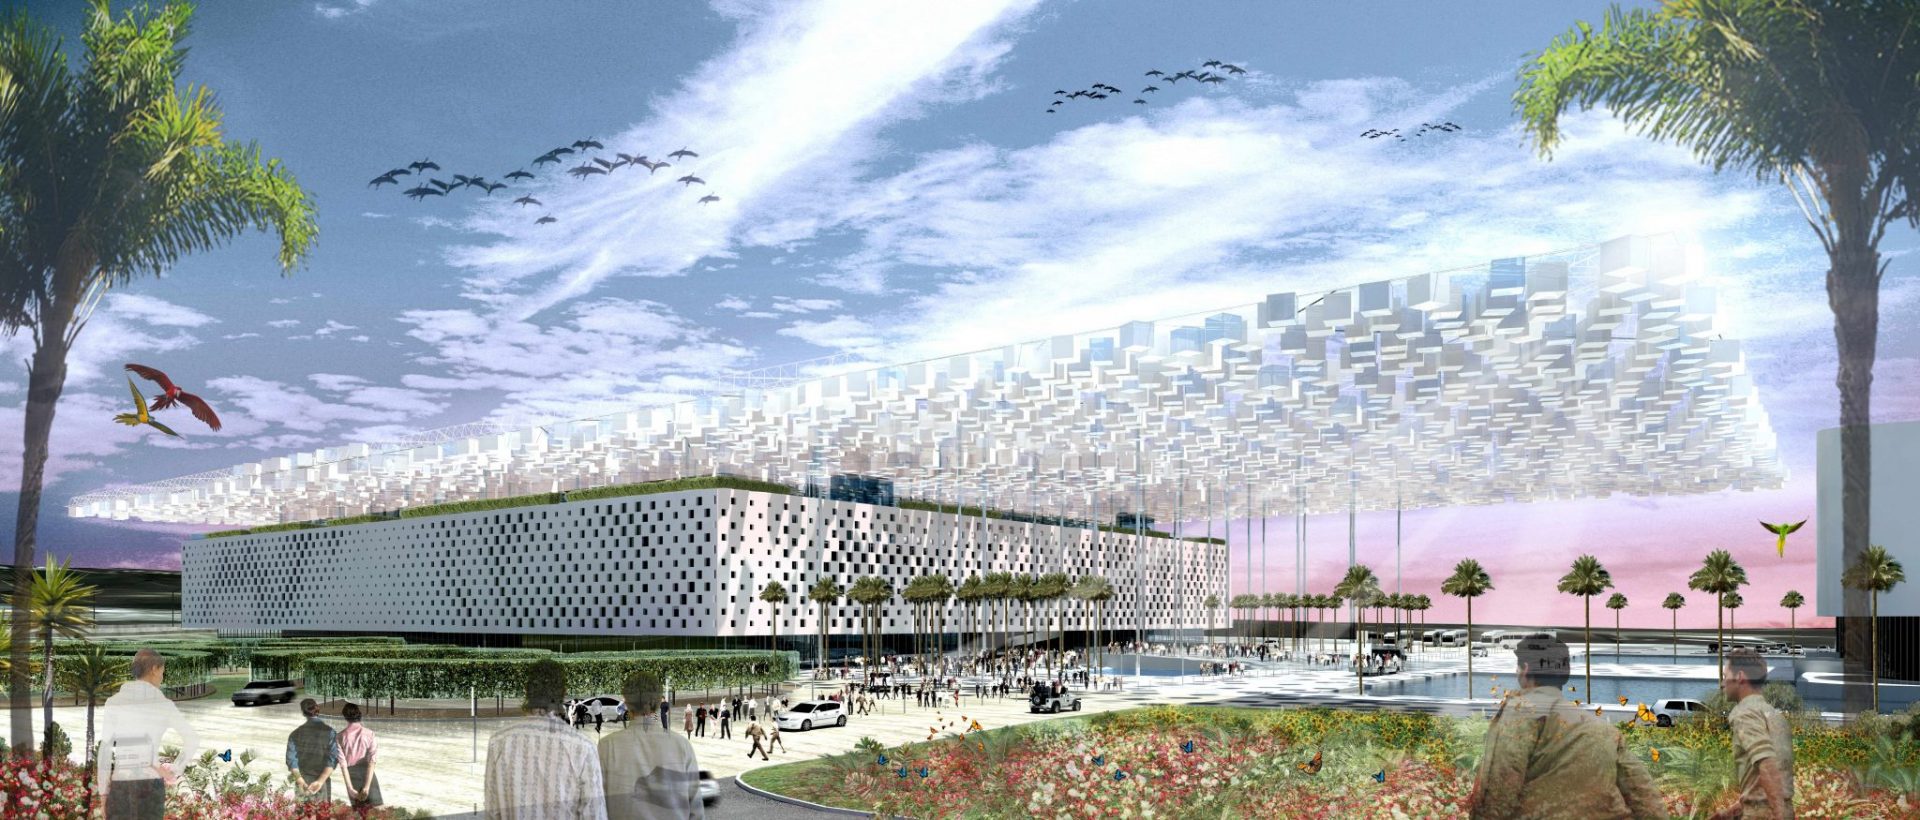 Algiers National Concert Hall Lemay Archictecture asd